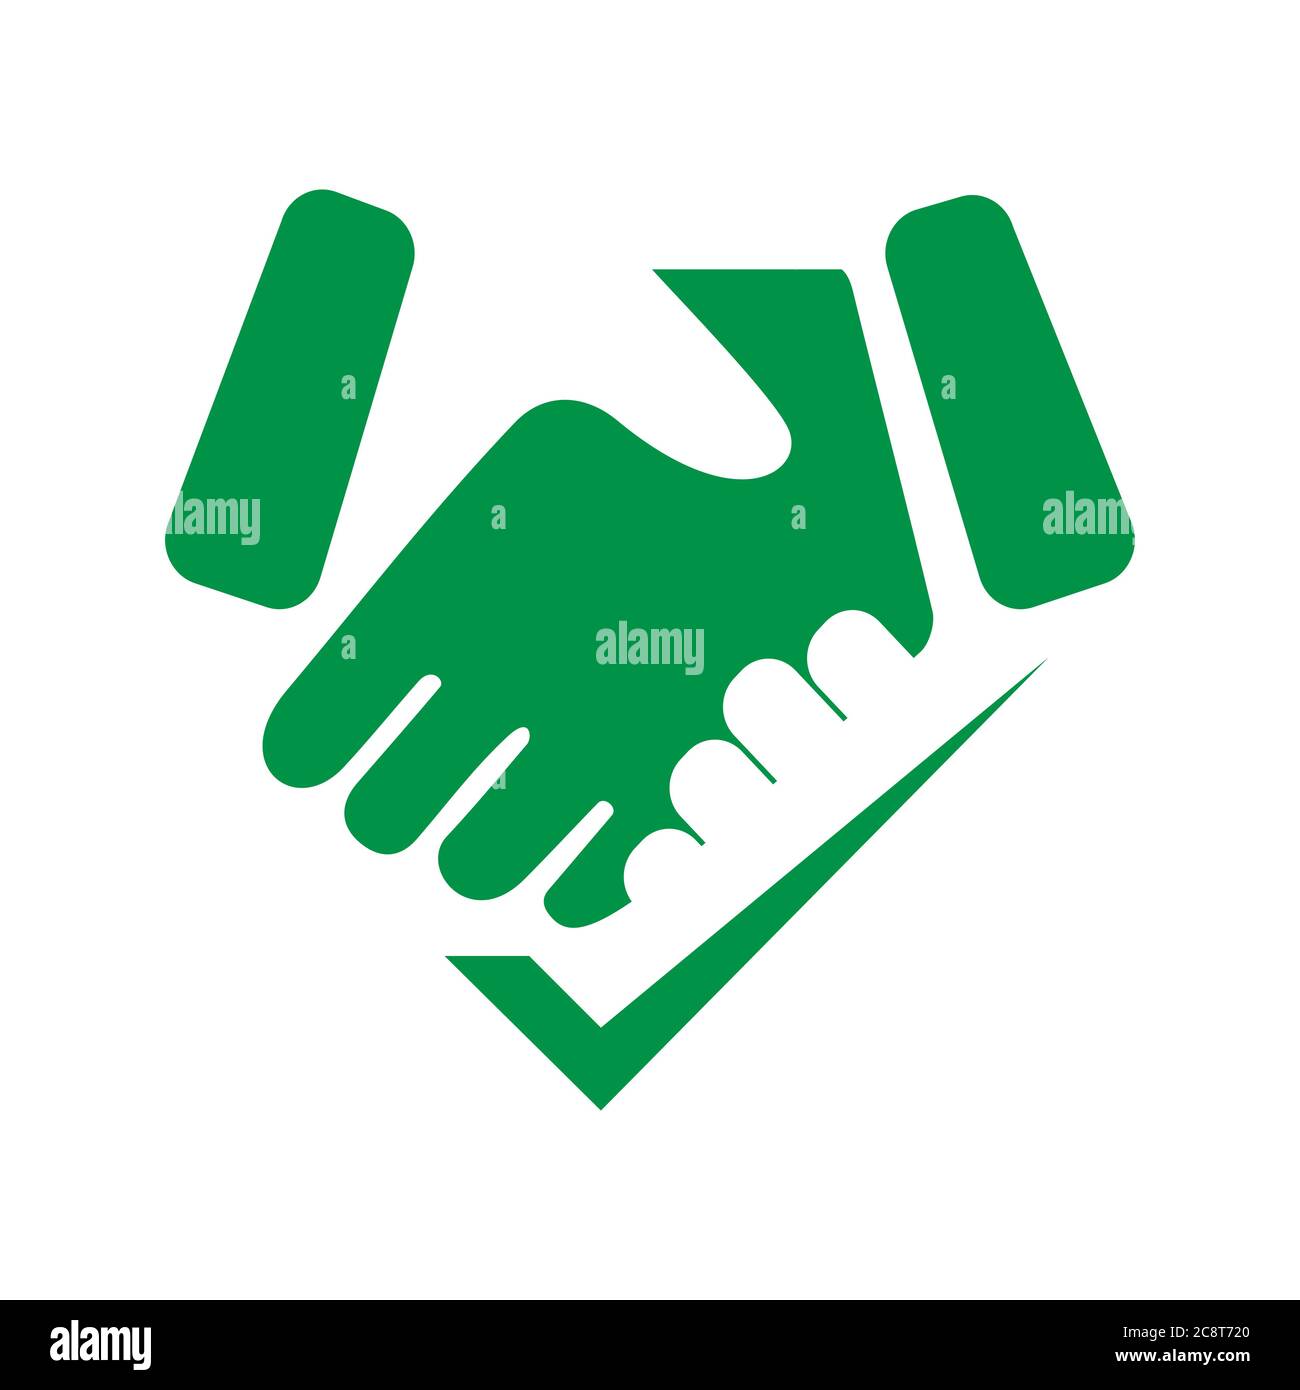 sign of teamwork and trust illustrations shake hand handshake logo vector the design meaning deal partnership friendship cooperation business Stock Vector